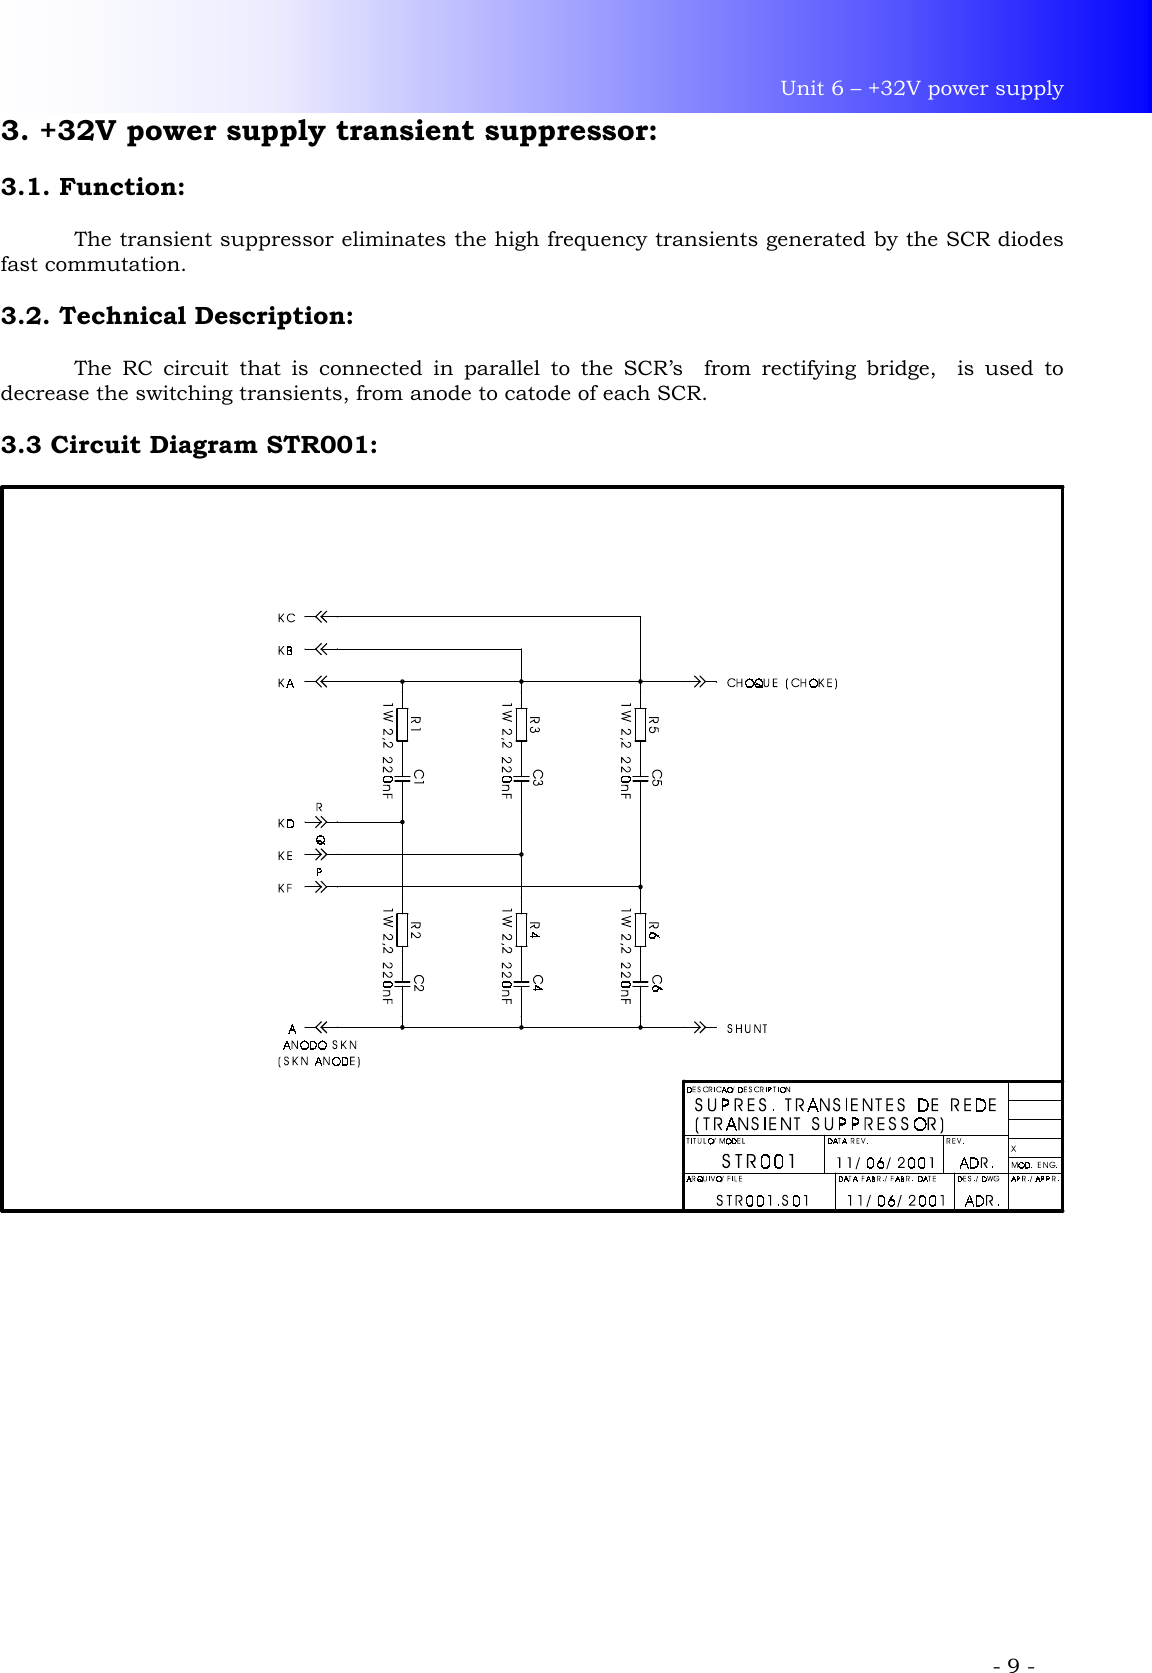 Unit 6 – +32V power supply             - 9 - 3. +32V power supply transient suppressor:  3.1. Function:    The transient suppressor eliminates the high frequency transients generated by the SCR diodes fast commutation.  3.2. Technical Description:    The RC circuit that is connected in parallel to the SCR’s  from rectifying bridge,  is used to decrease the switching transients, from anode to catode of each SCR.  3.3 Circuit Diagram STR001:  